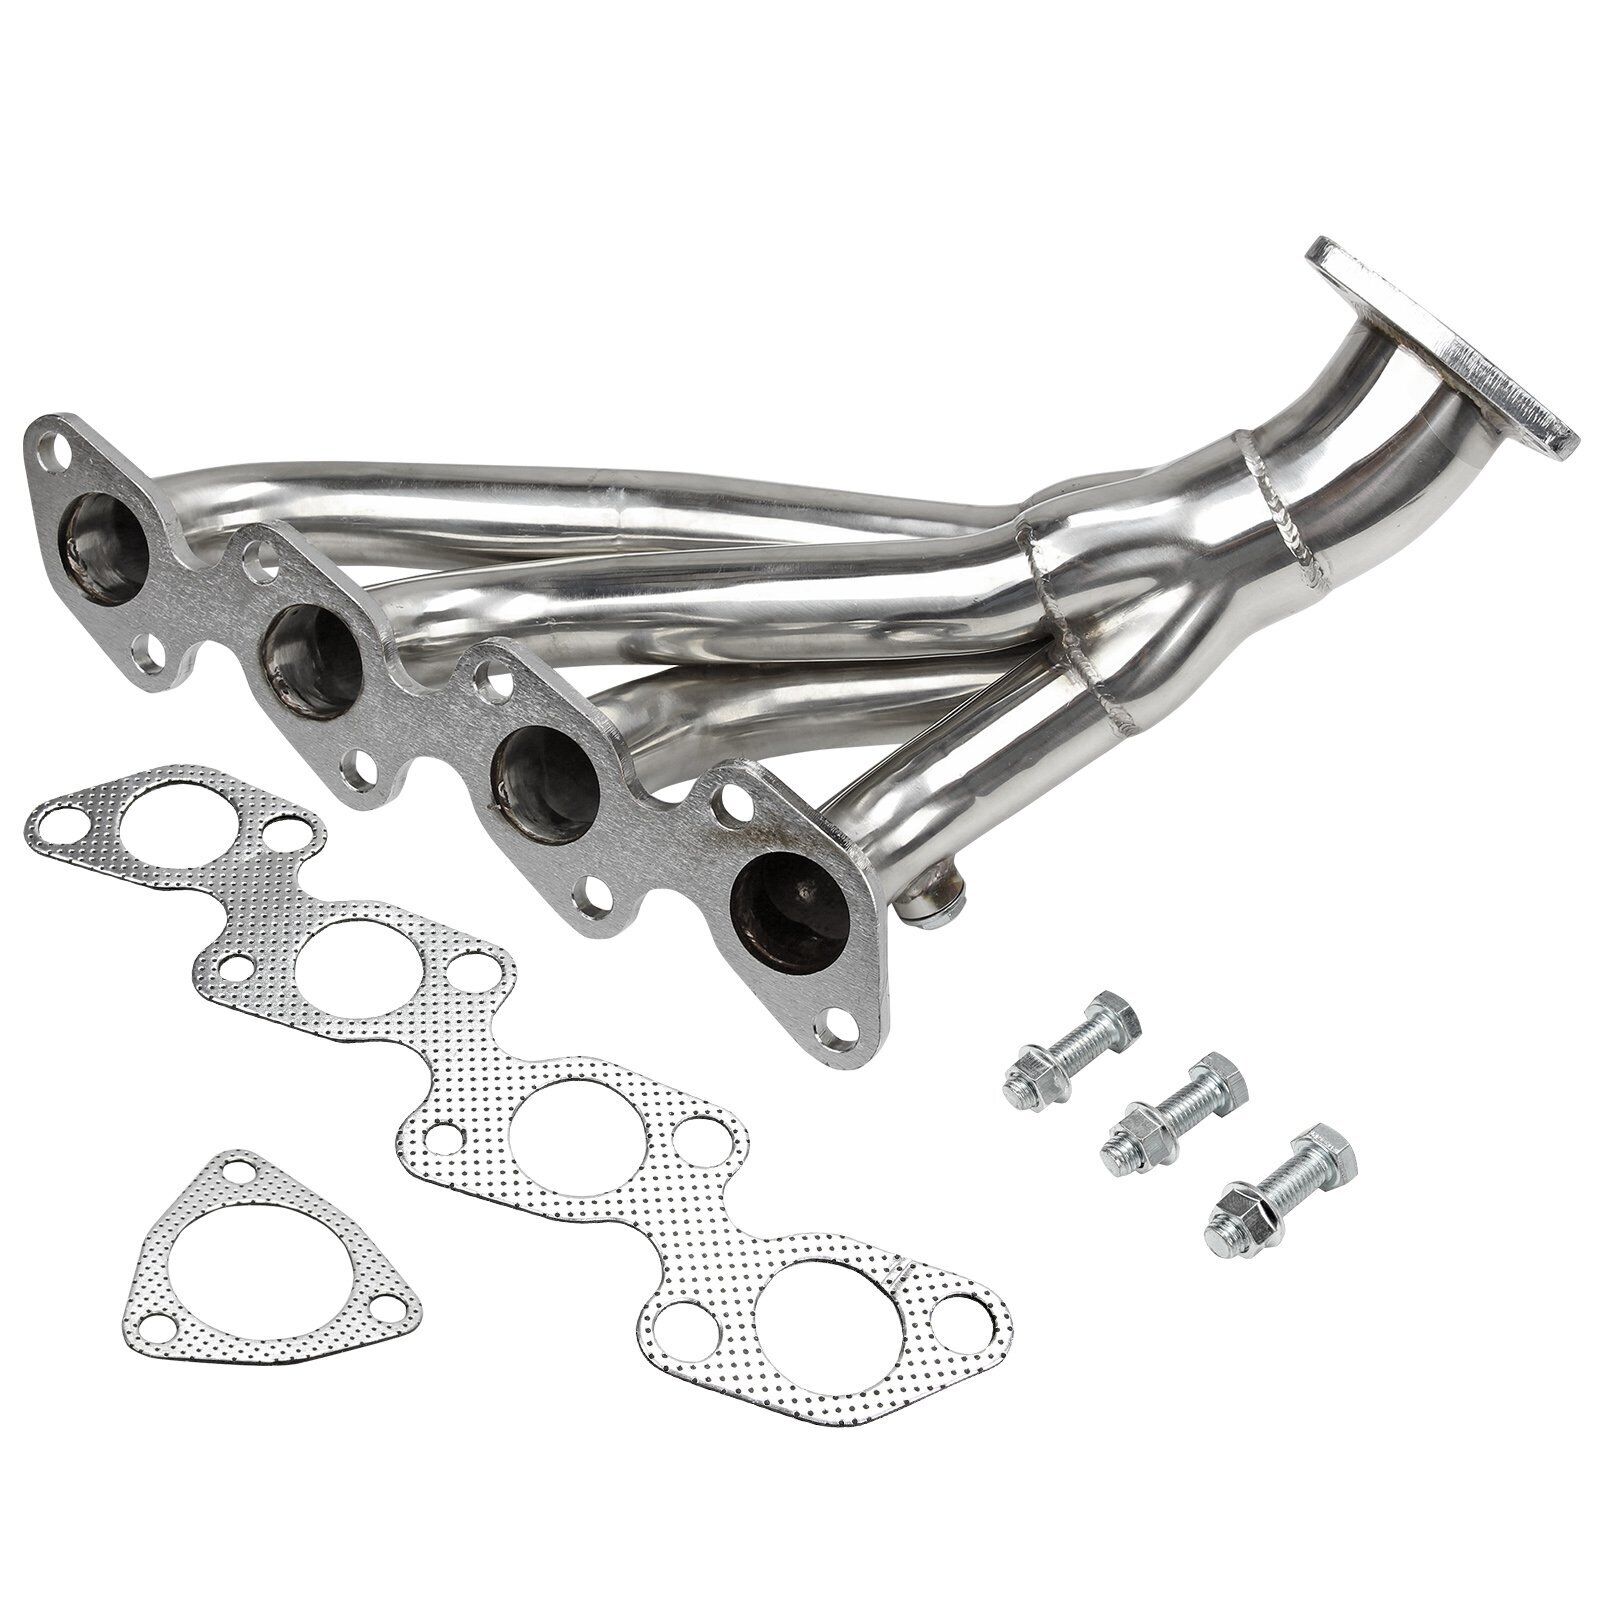 NEW Stainless Exhaust Header For 95-98 Nissan 240SX XE SE S14 KA24